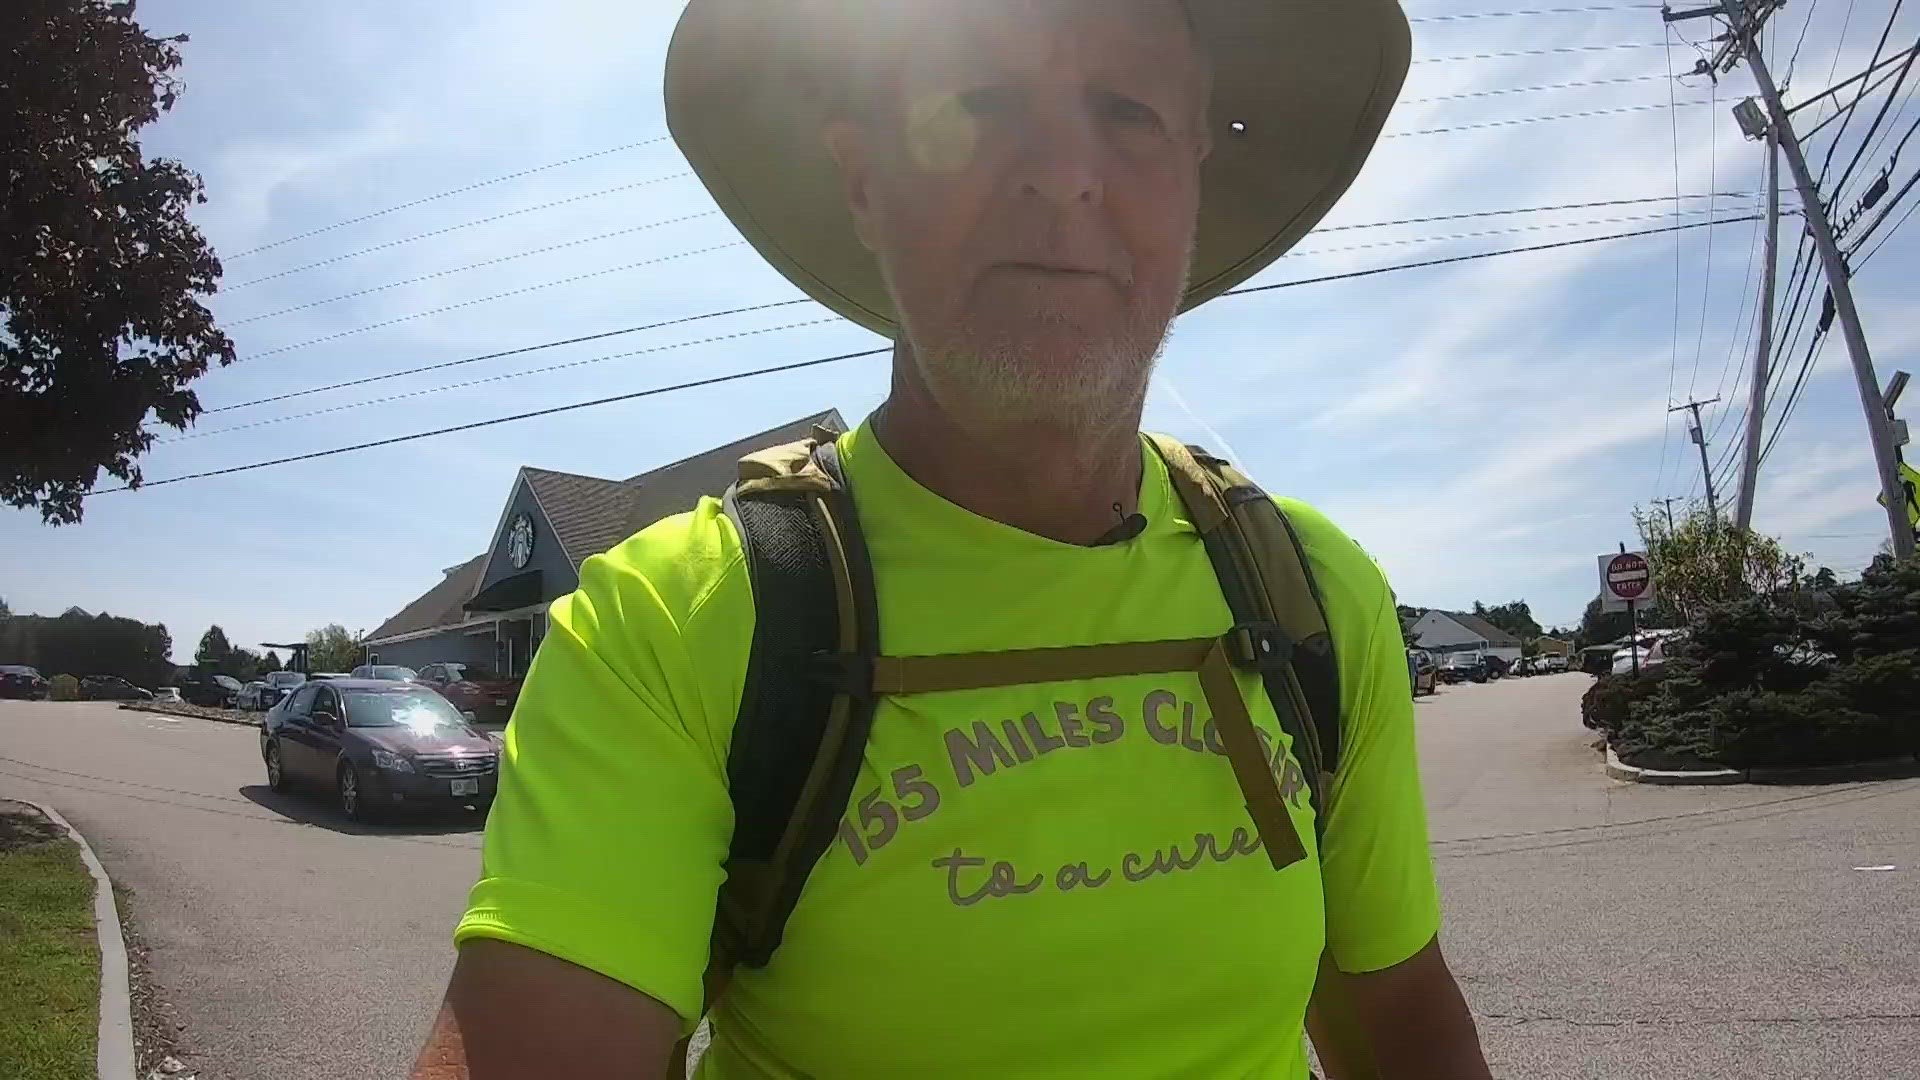 Tim Duffy of Worcester, Massachusetts has been walking from Cape Cod to Ogunquit since mid-August, raising $43,000 for the Pancreatic Cancer Action Network.